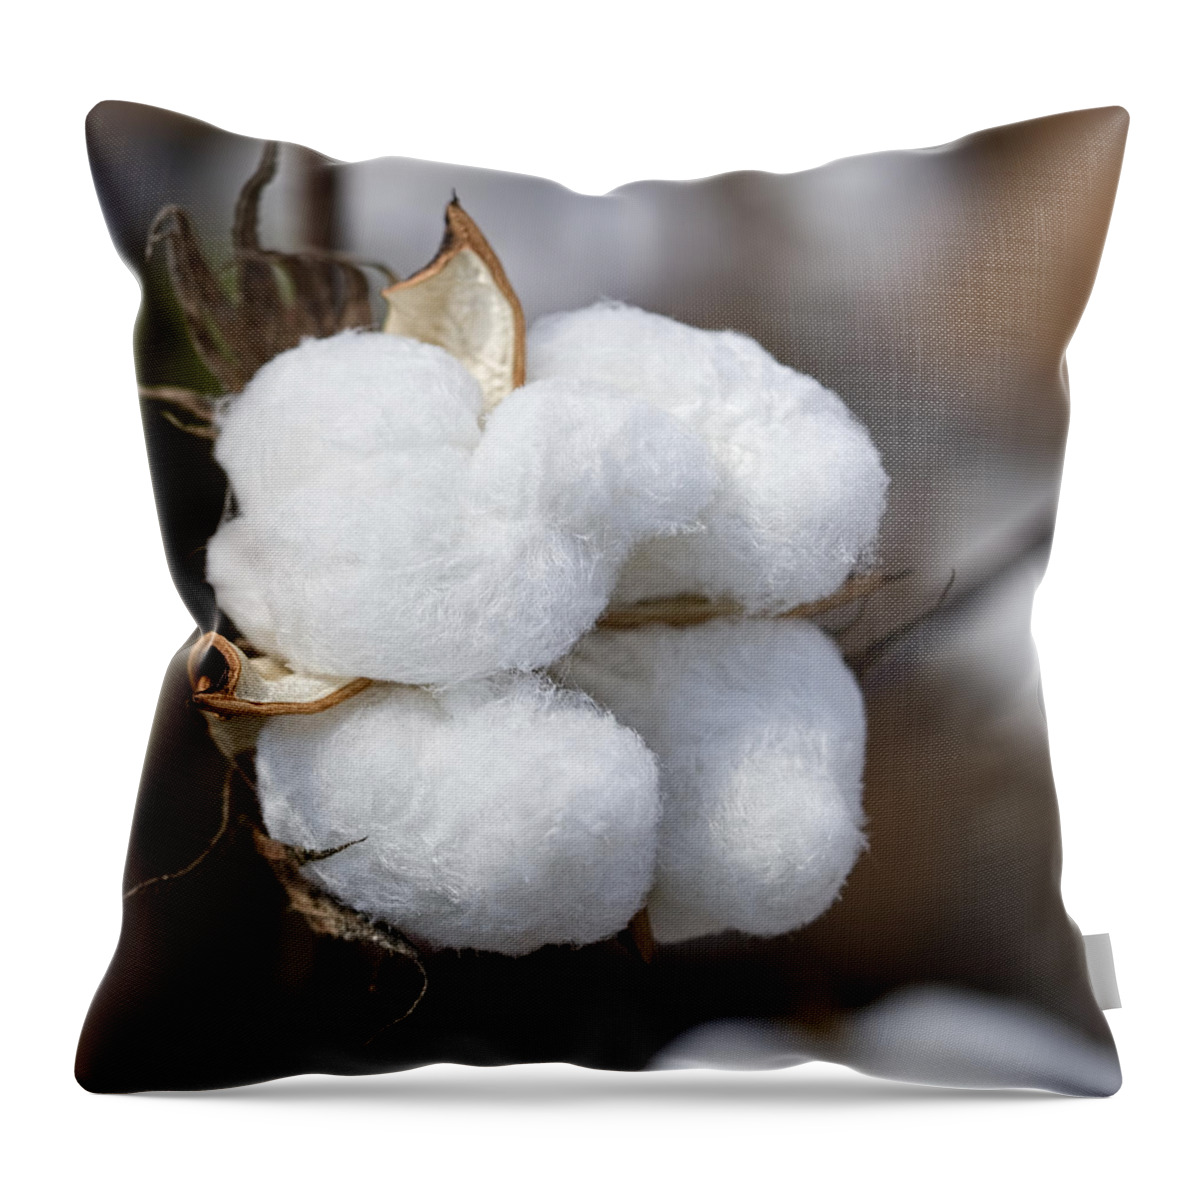 Cotton Throw Pillow featuring the photograph Alabama Cotton Boll by Kathy Clark